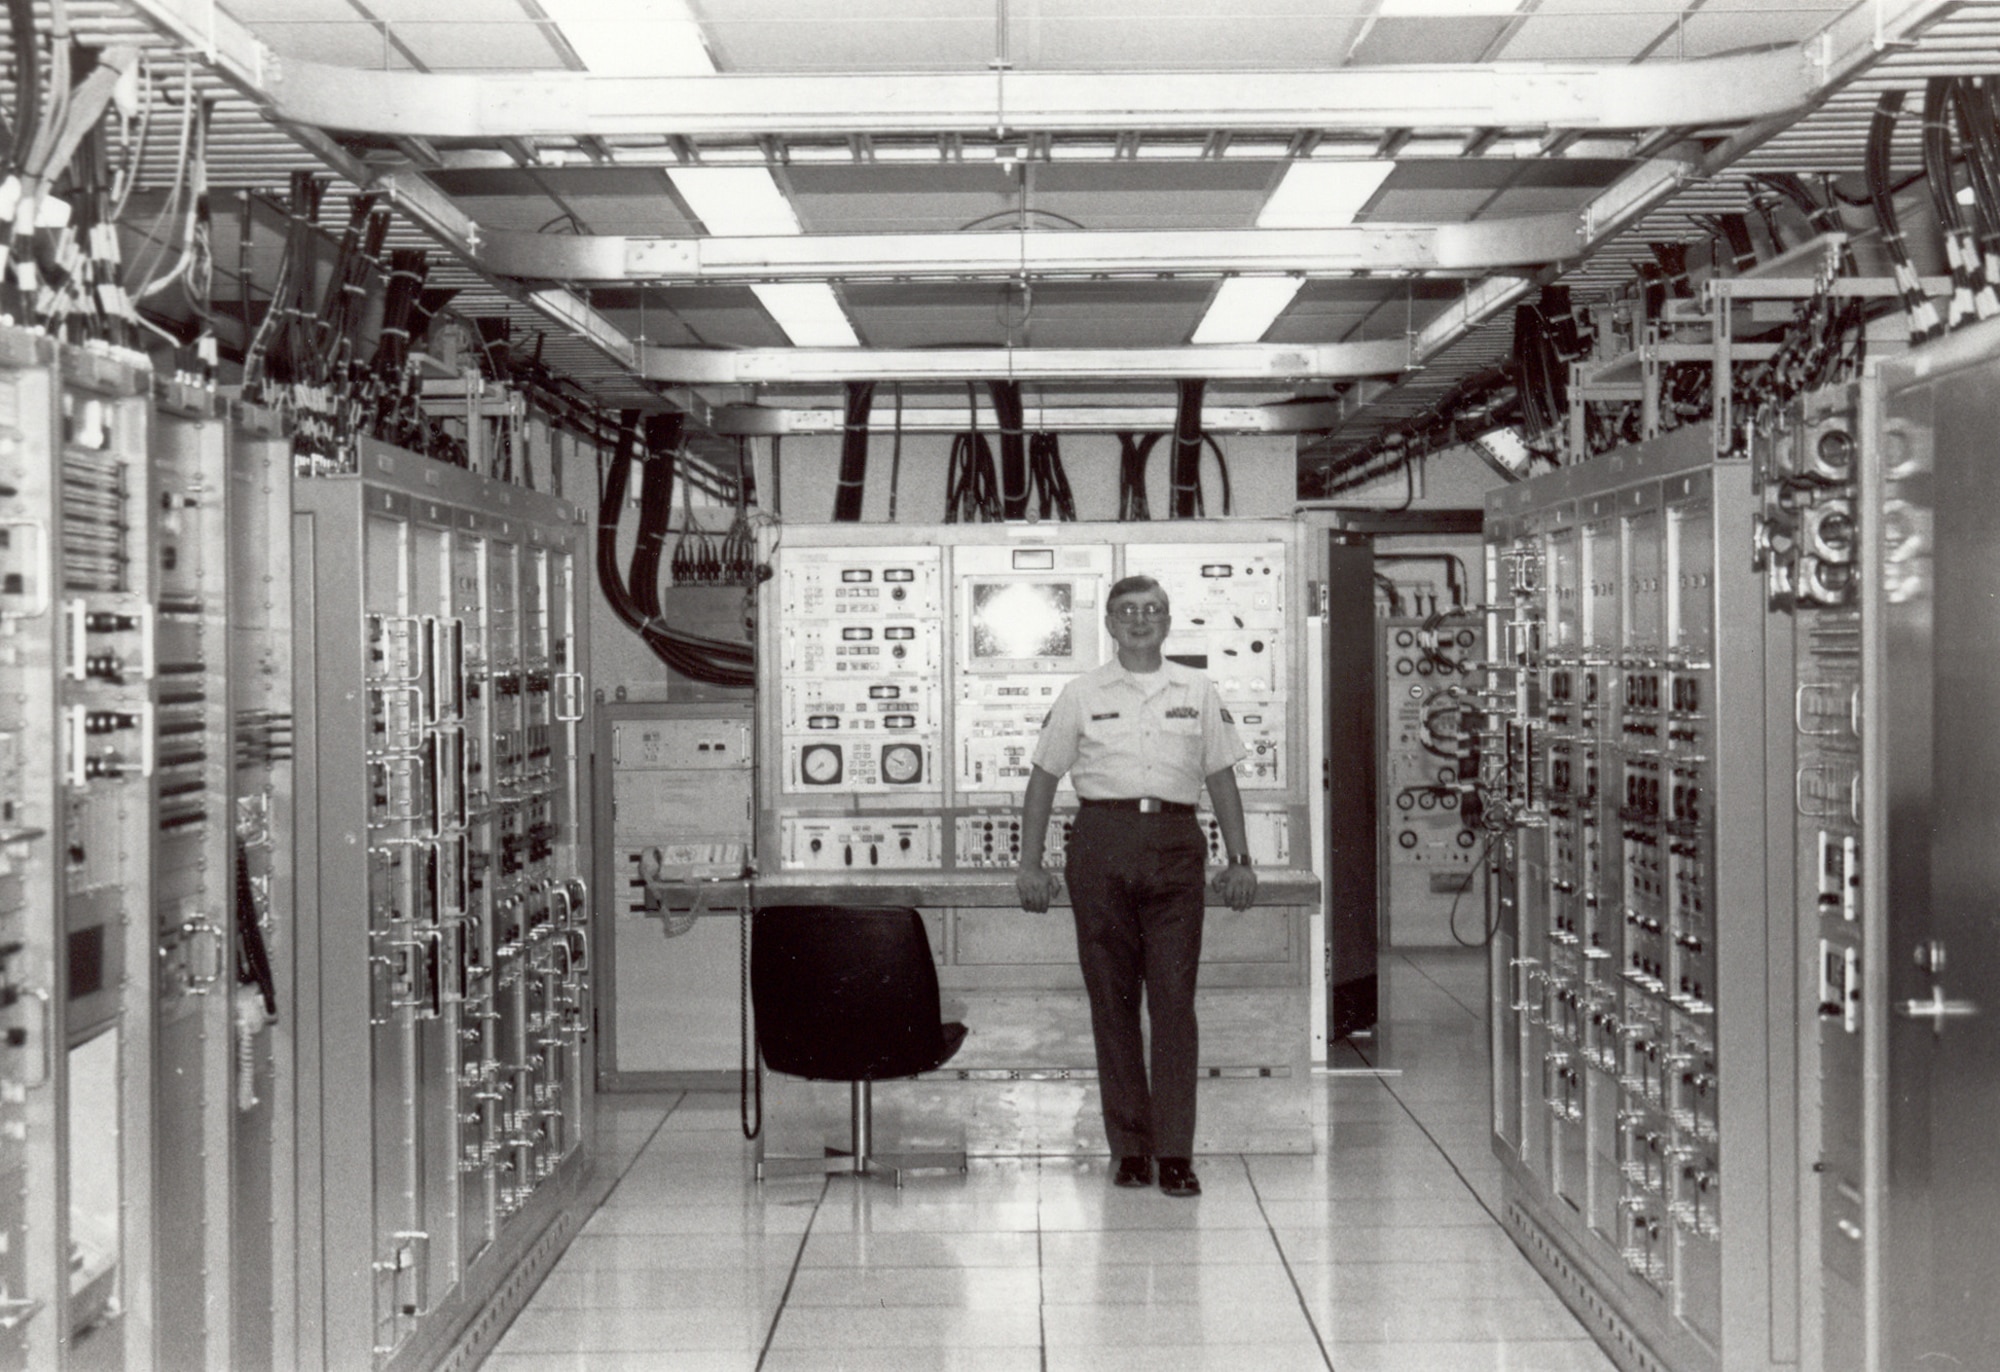 A member of the 1st Aerospace Communications Group stands among the equipment racks of the Defense Satellite Communications System terminal collocated with the AFSATCOM consolidated ground terminal, Offutt AFB, Nebraska, 5 Jun 1981.